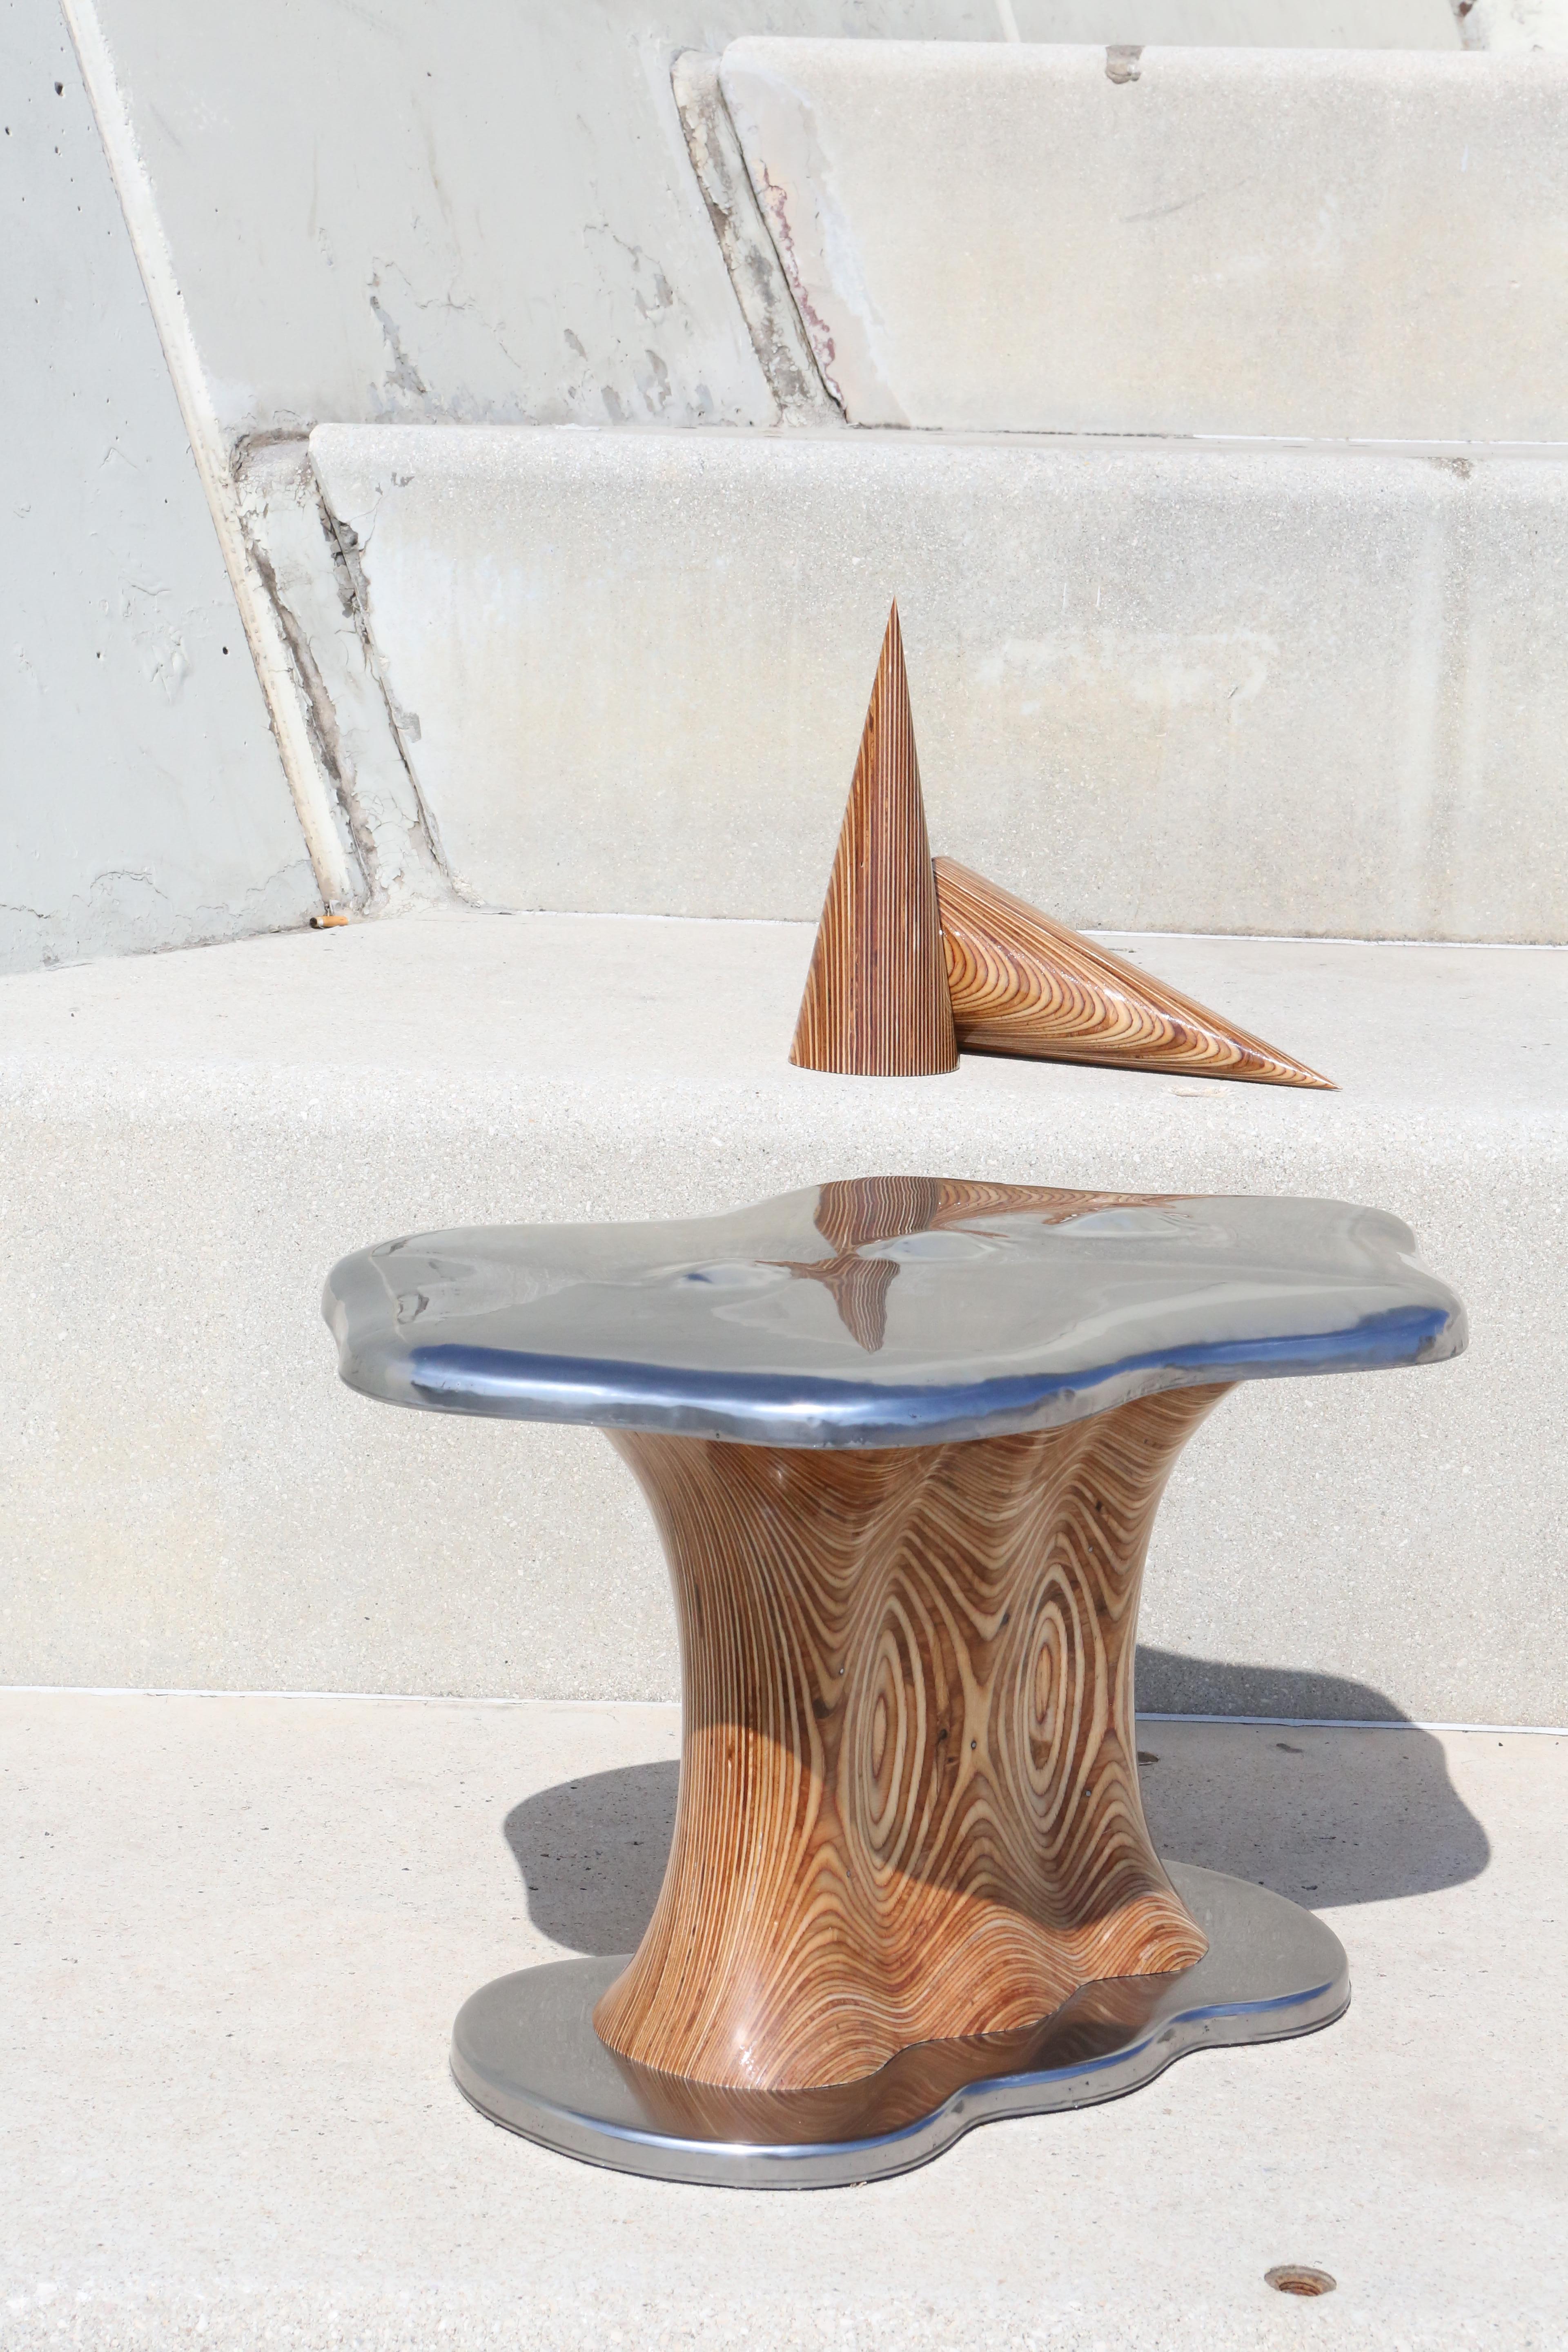 Steel Trasnfera Side Table by Alina Rotzinger